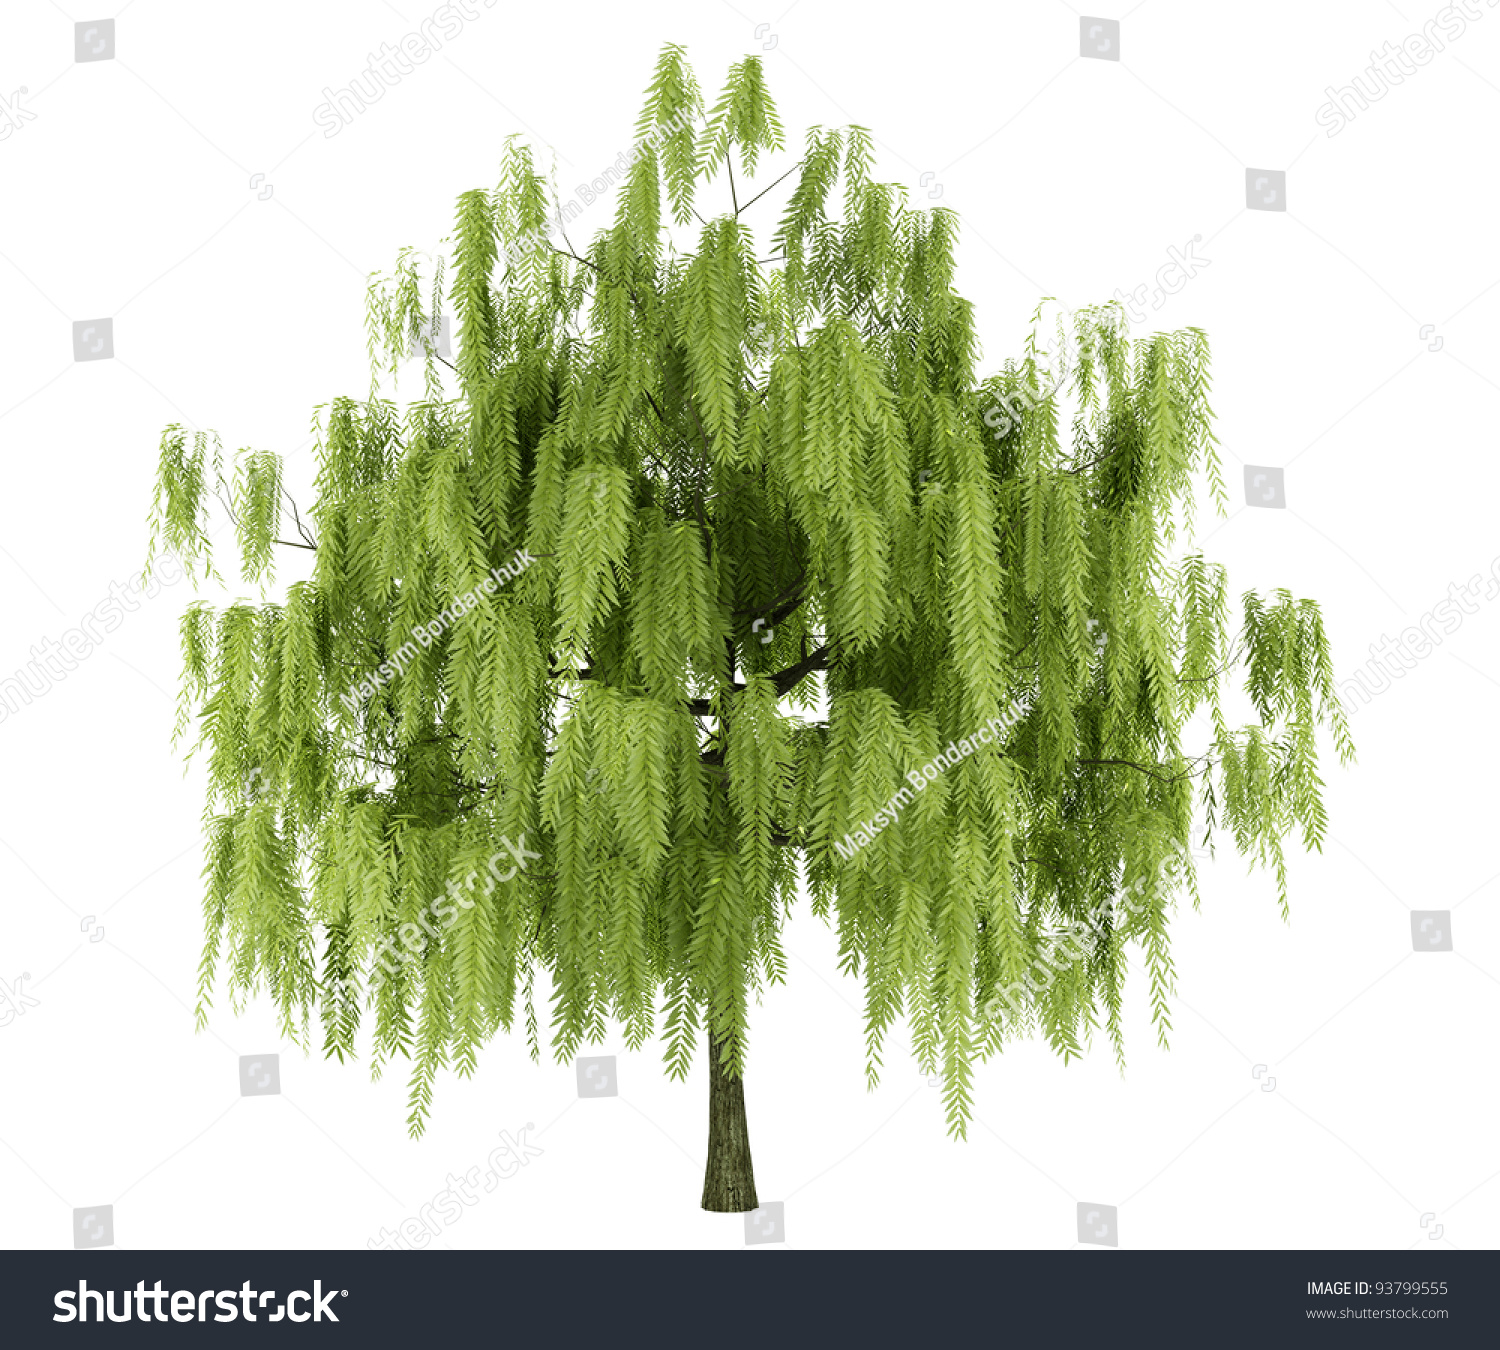 Willow Tree Isolated On White Background Stock Photo 93799555